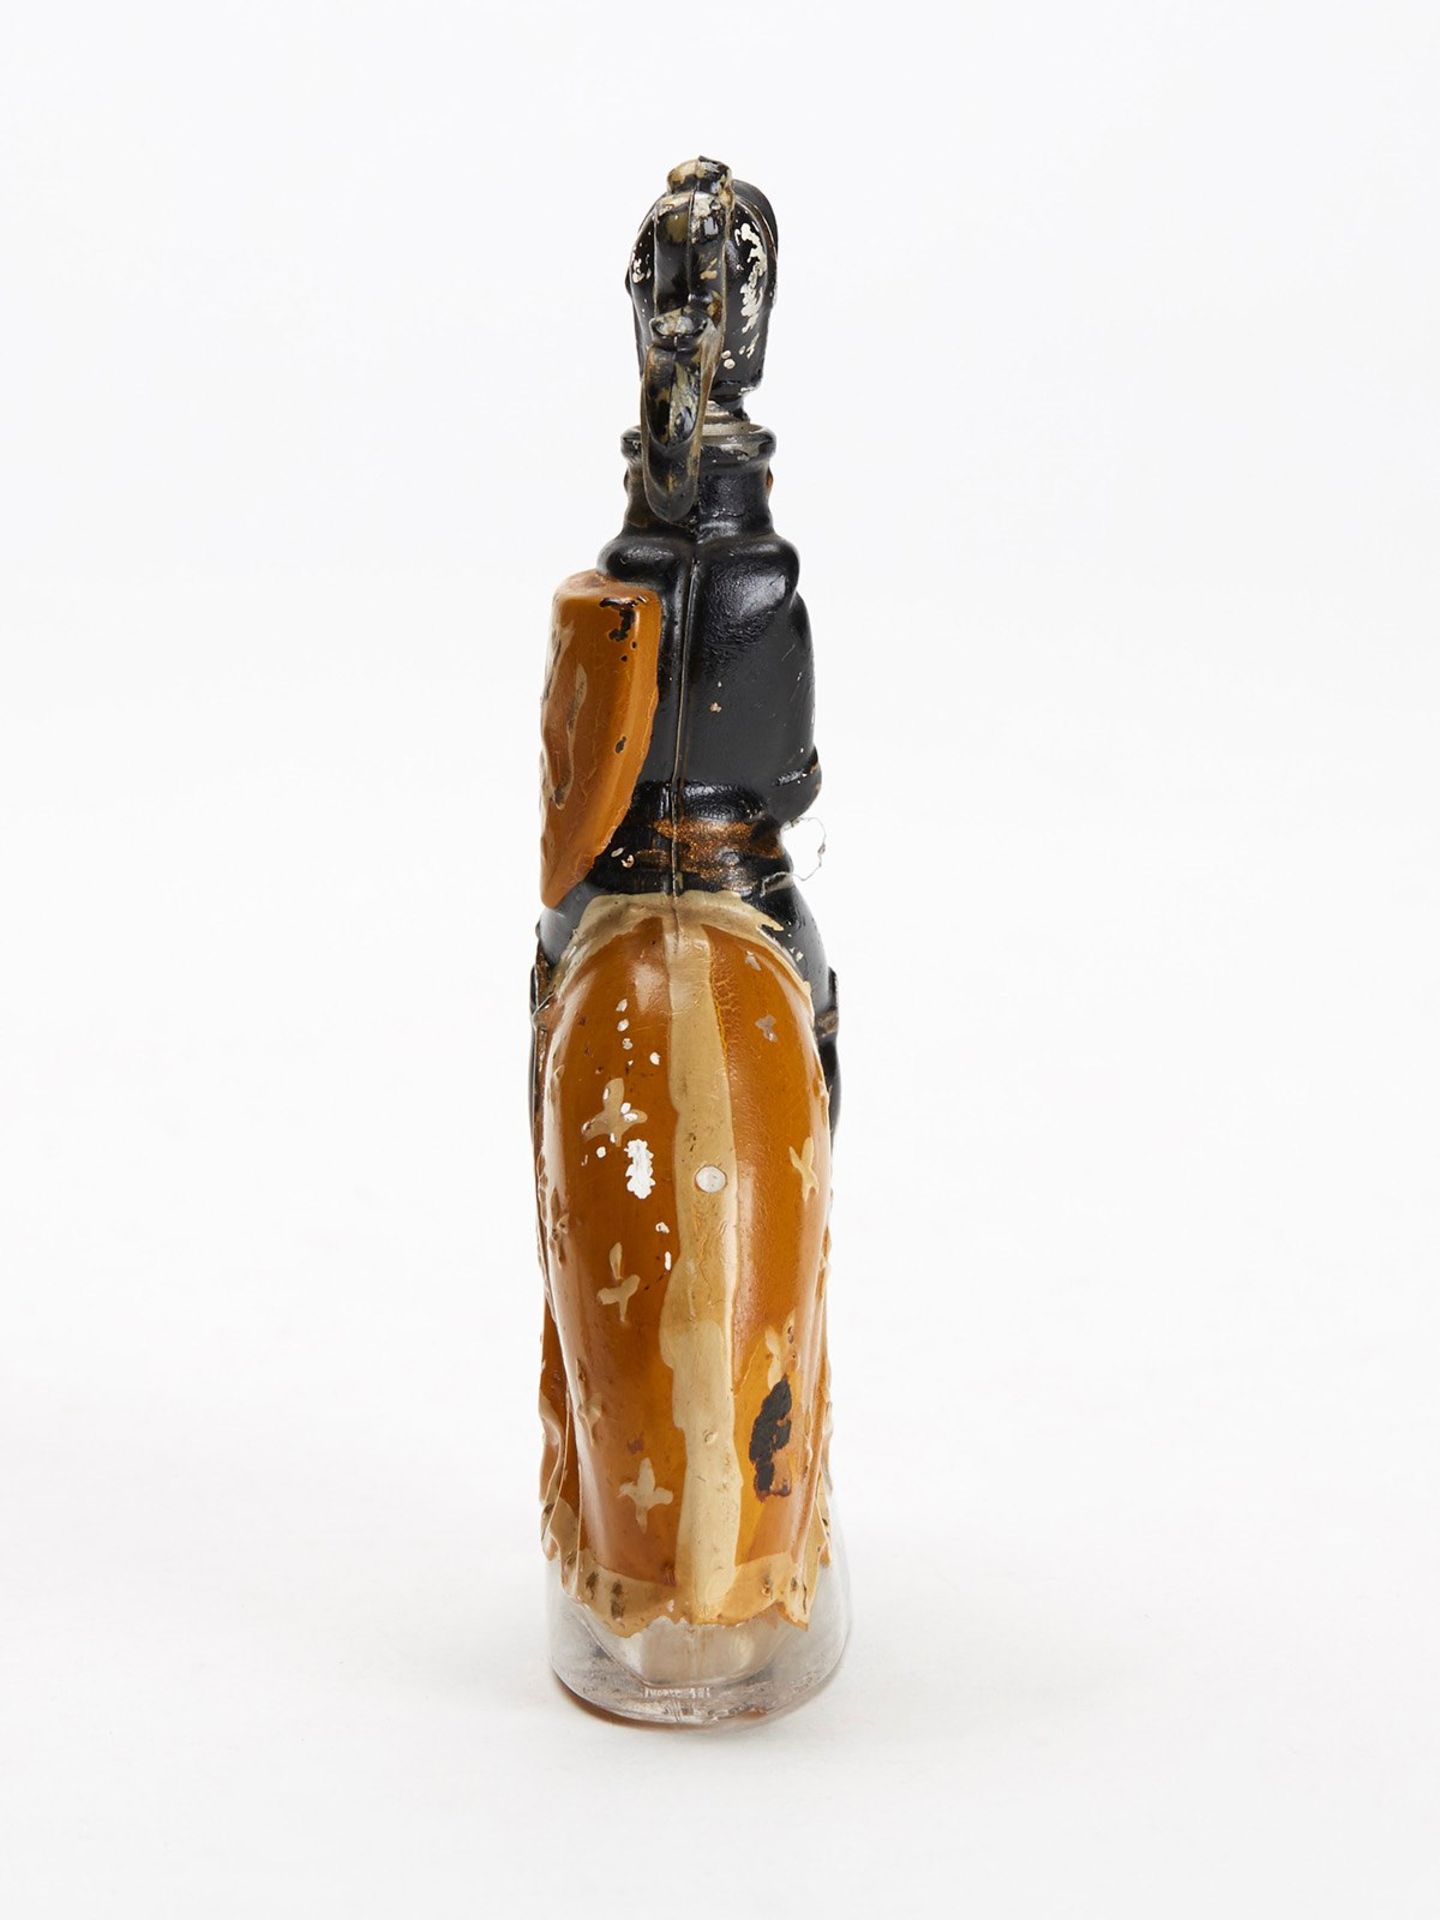 TWO ART DECO NOVELTY GLASS SCENT BOTTLES c.1920/30 - Image 6 of 10